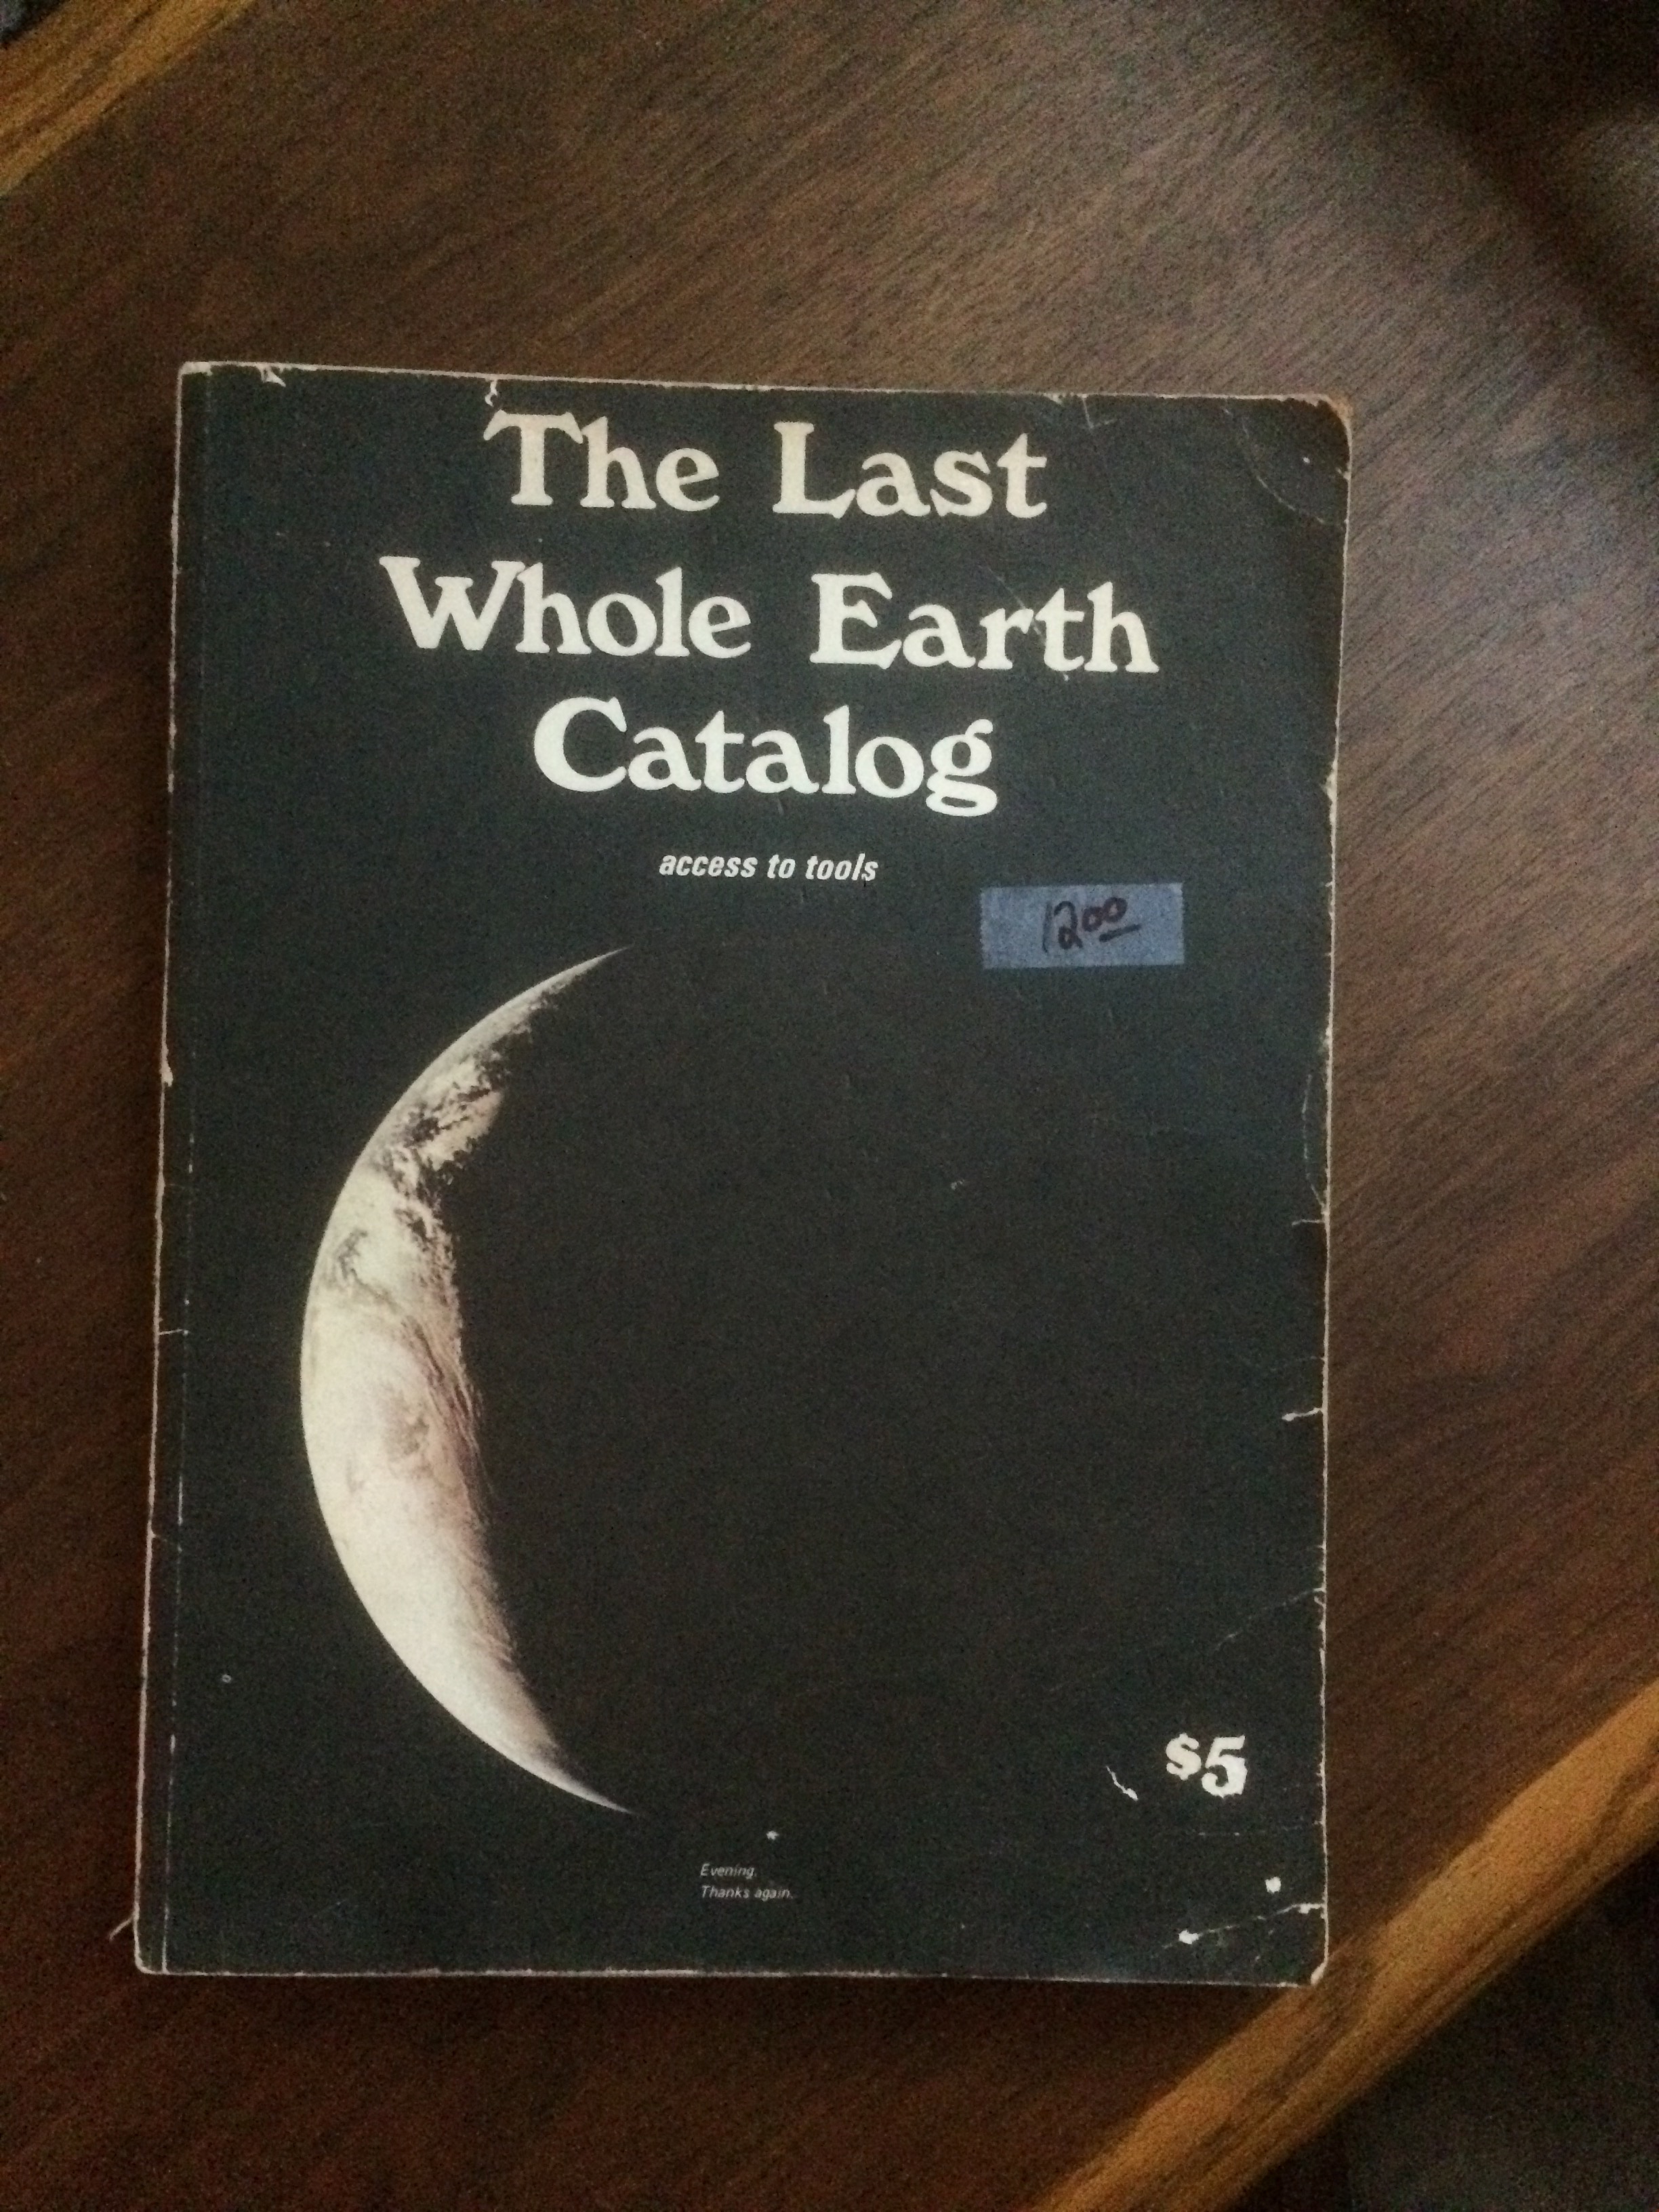 The Last Whole Earth Catalog on my coffe table